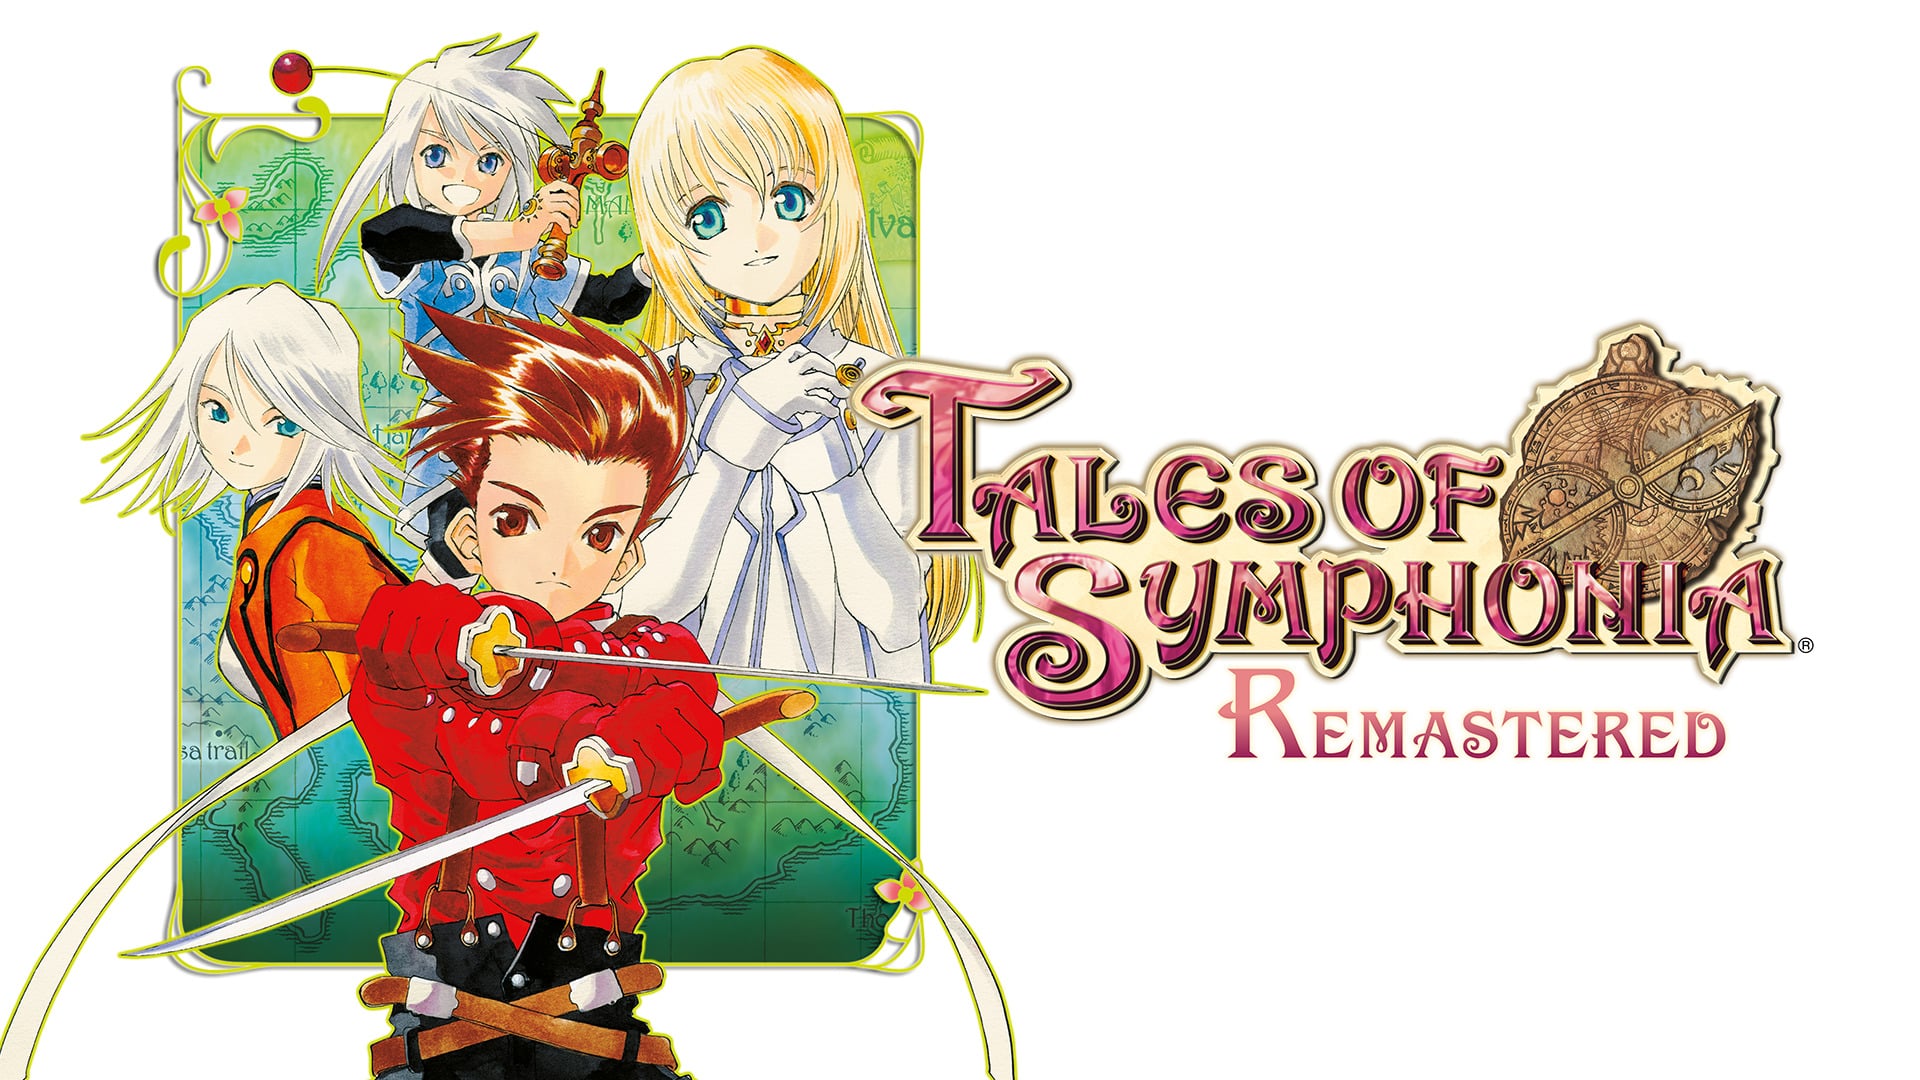 TALES OF SYMPHONIA REMASTERed, GamersRD